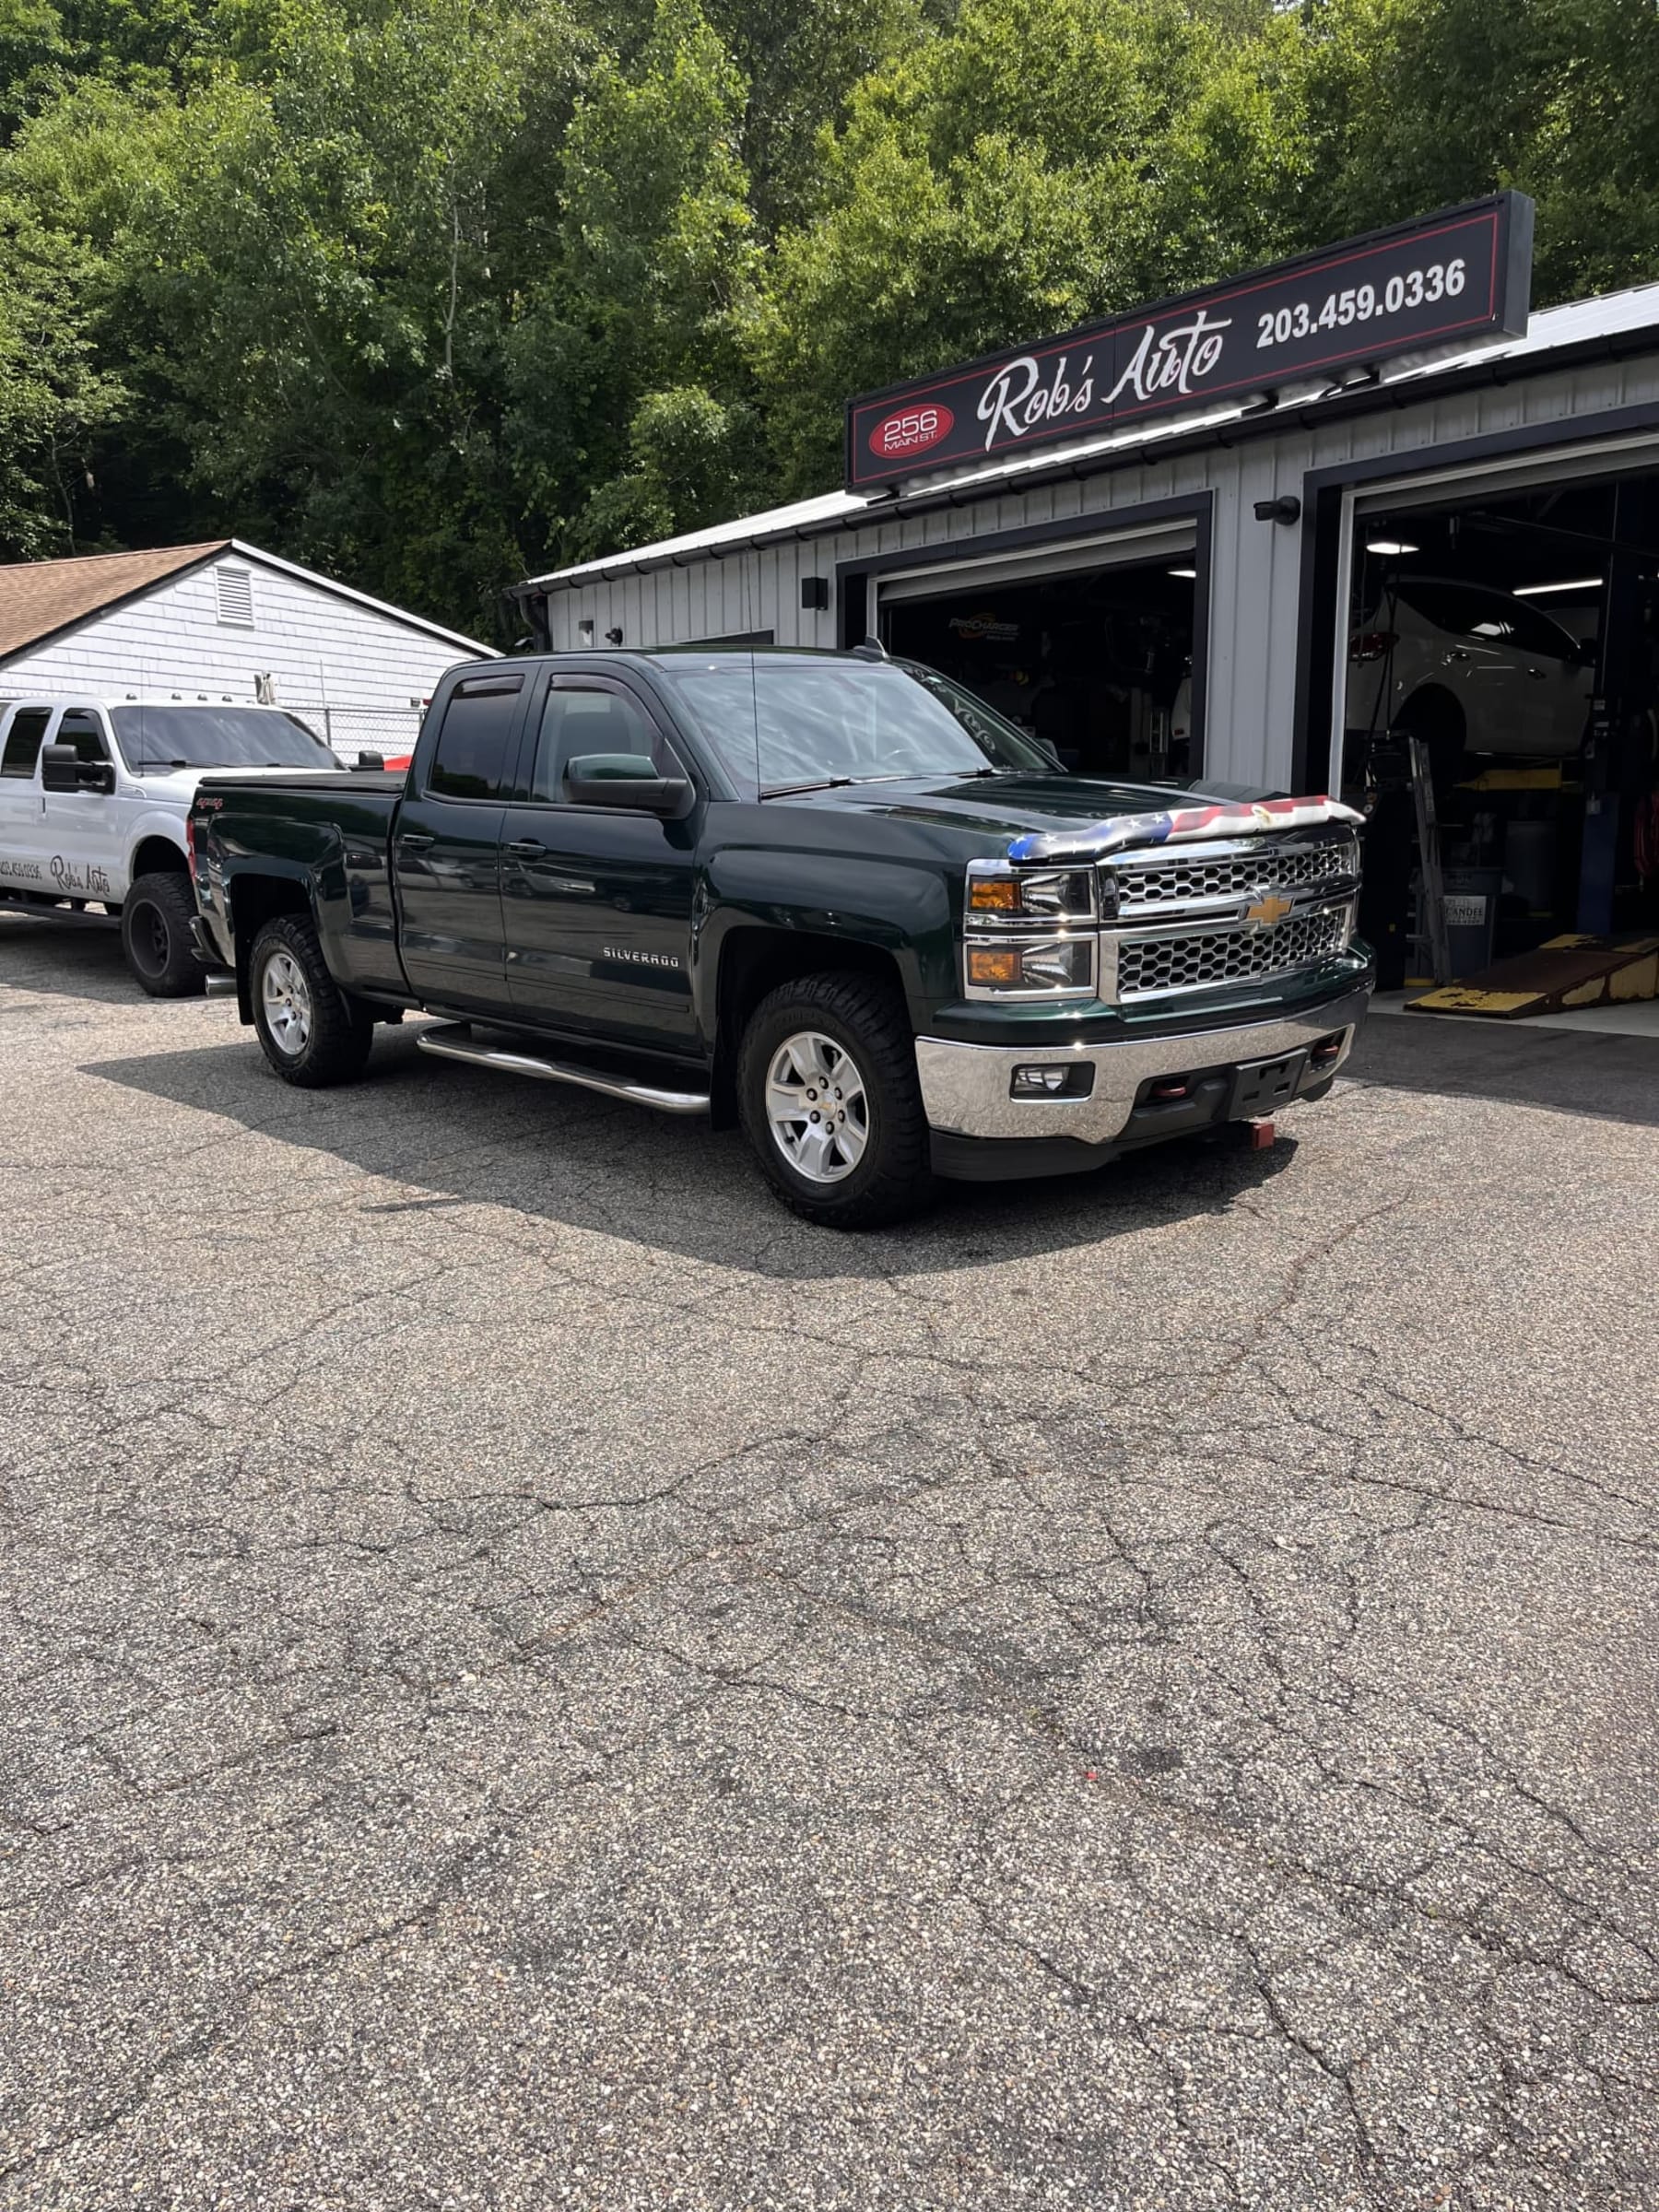 NEW ARRIVAL!! 2015 Chevrolet Silverado LT!! Cleanest one you will see! Runs and drives new! Remote Start, Backup Camera, Power heated seats, Bluetooth and much more! 94,800 miles!! Definitely won’t last at $19,900!!